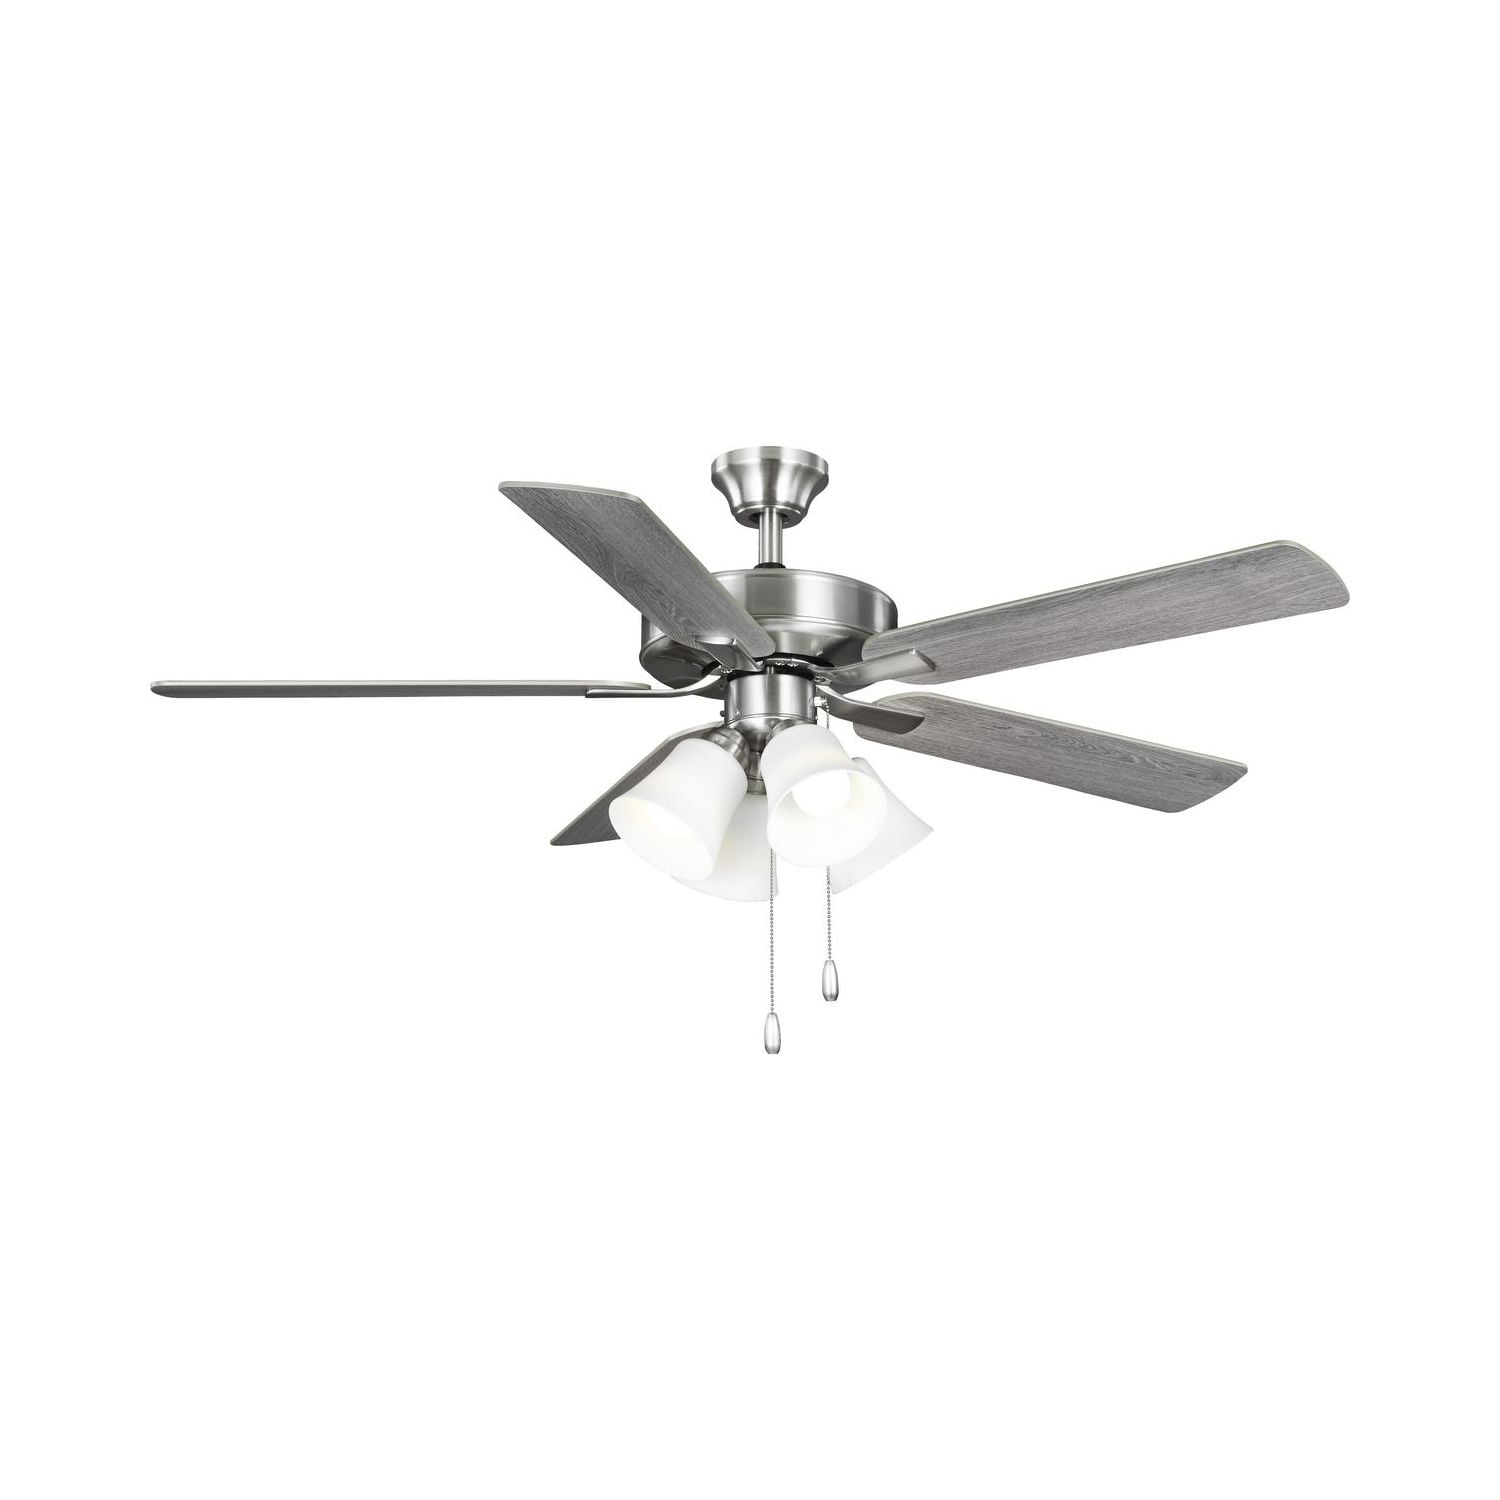 AirPro Collection 24 In. Ceiling Fan Downrod in Polished Chrome